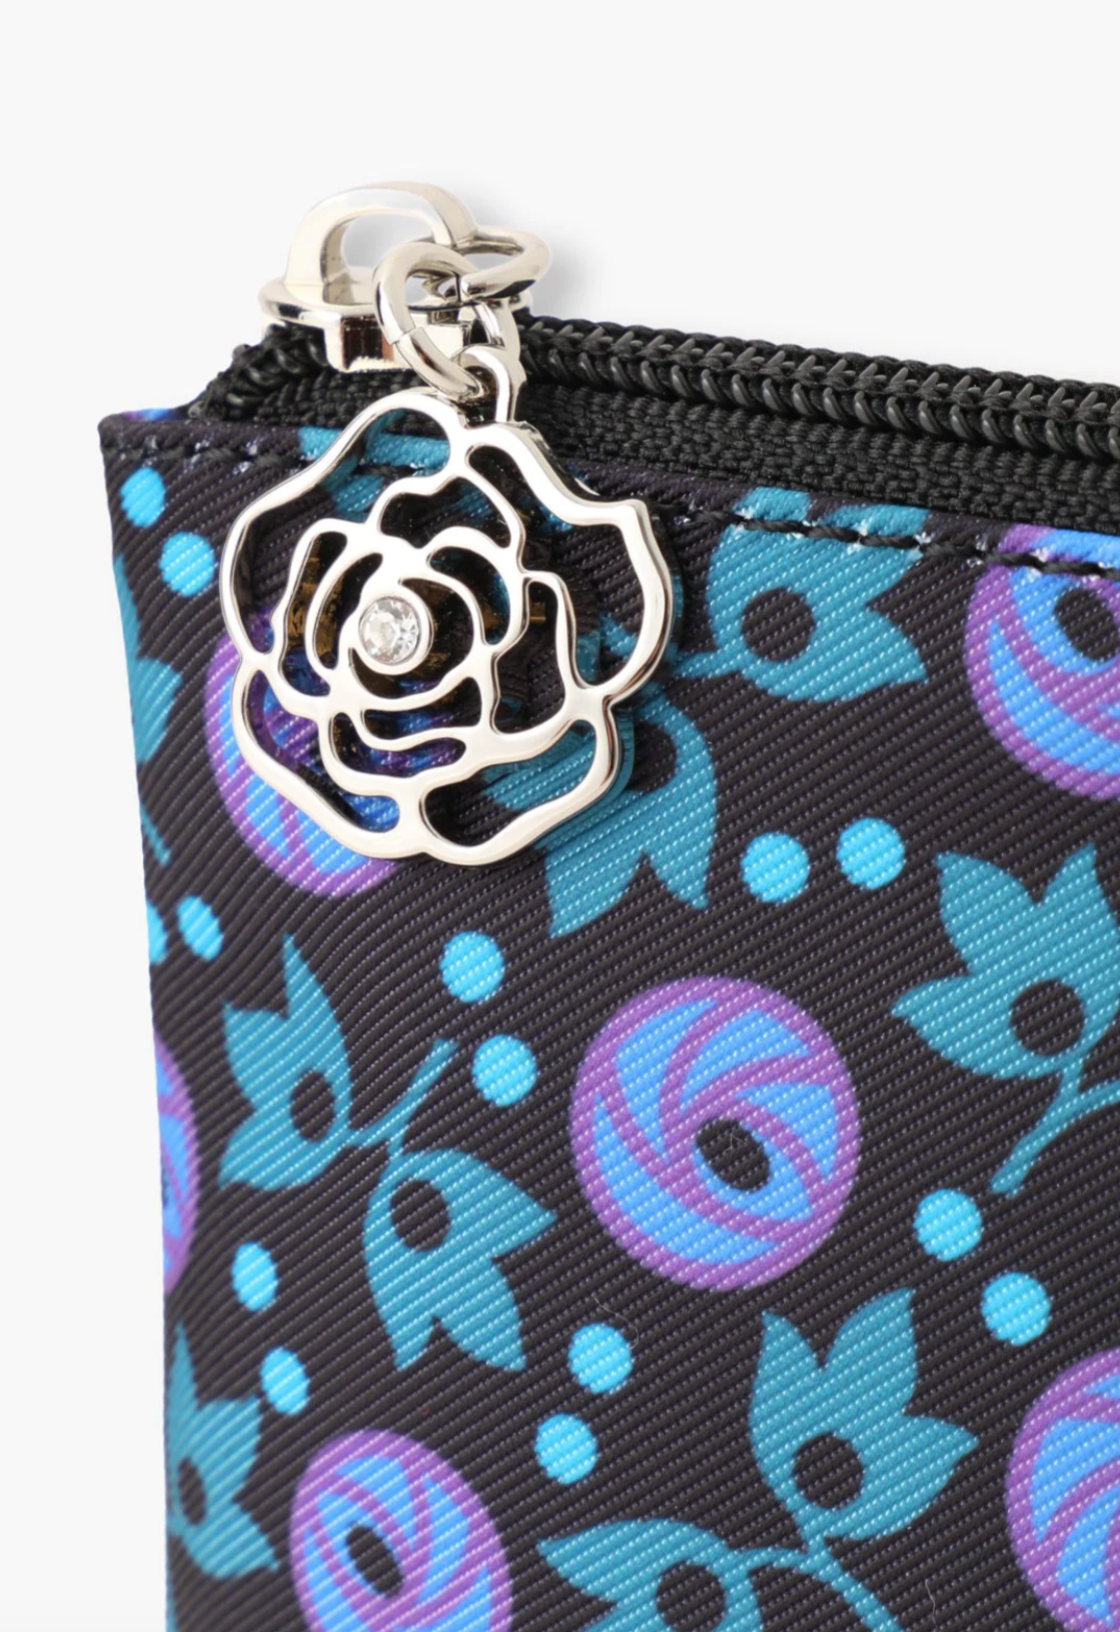 Detail of blue floral pouch and is finished with a silver rose charm zipper closure